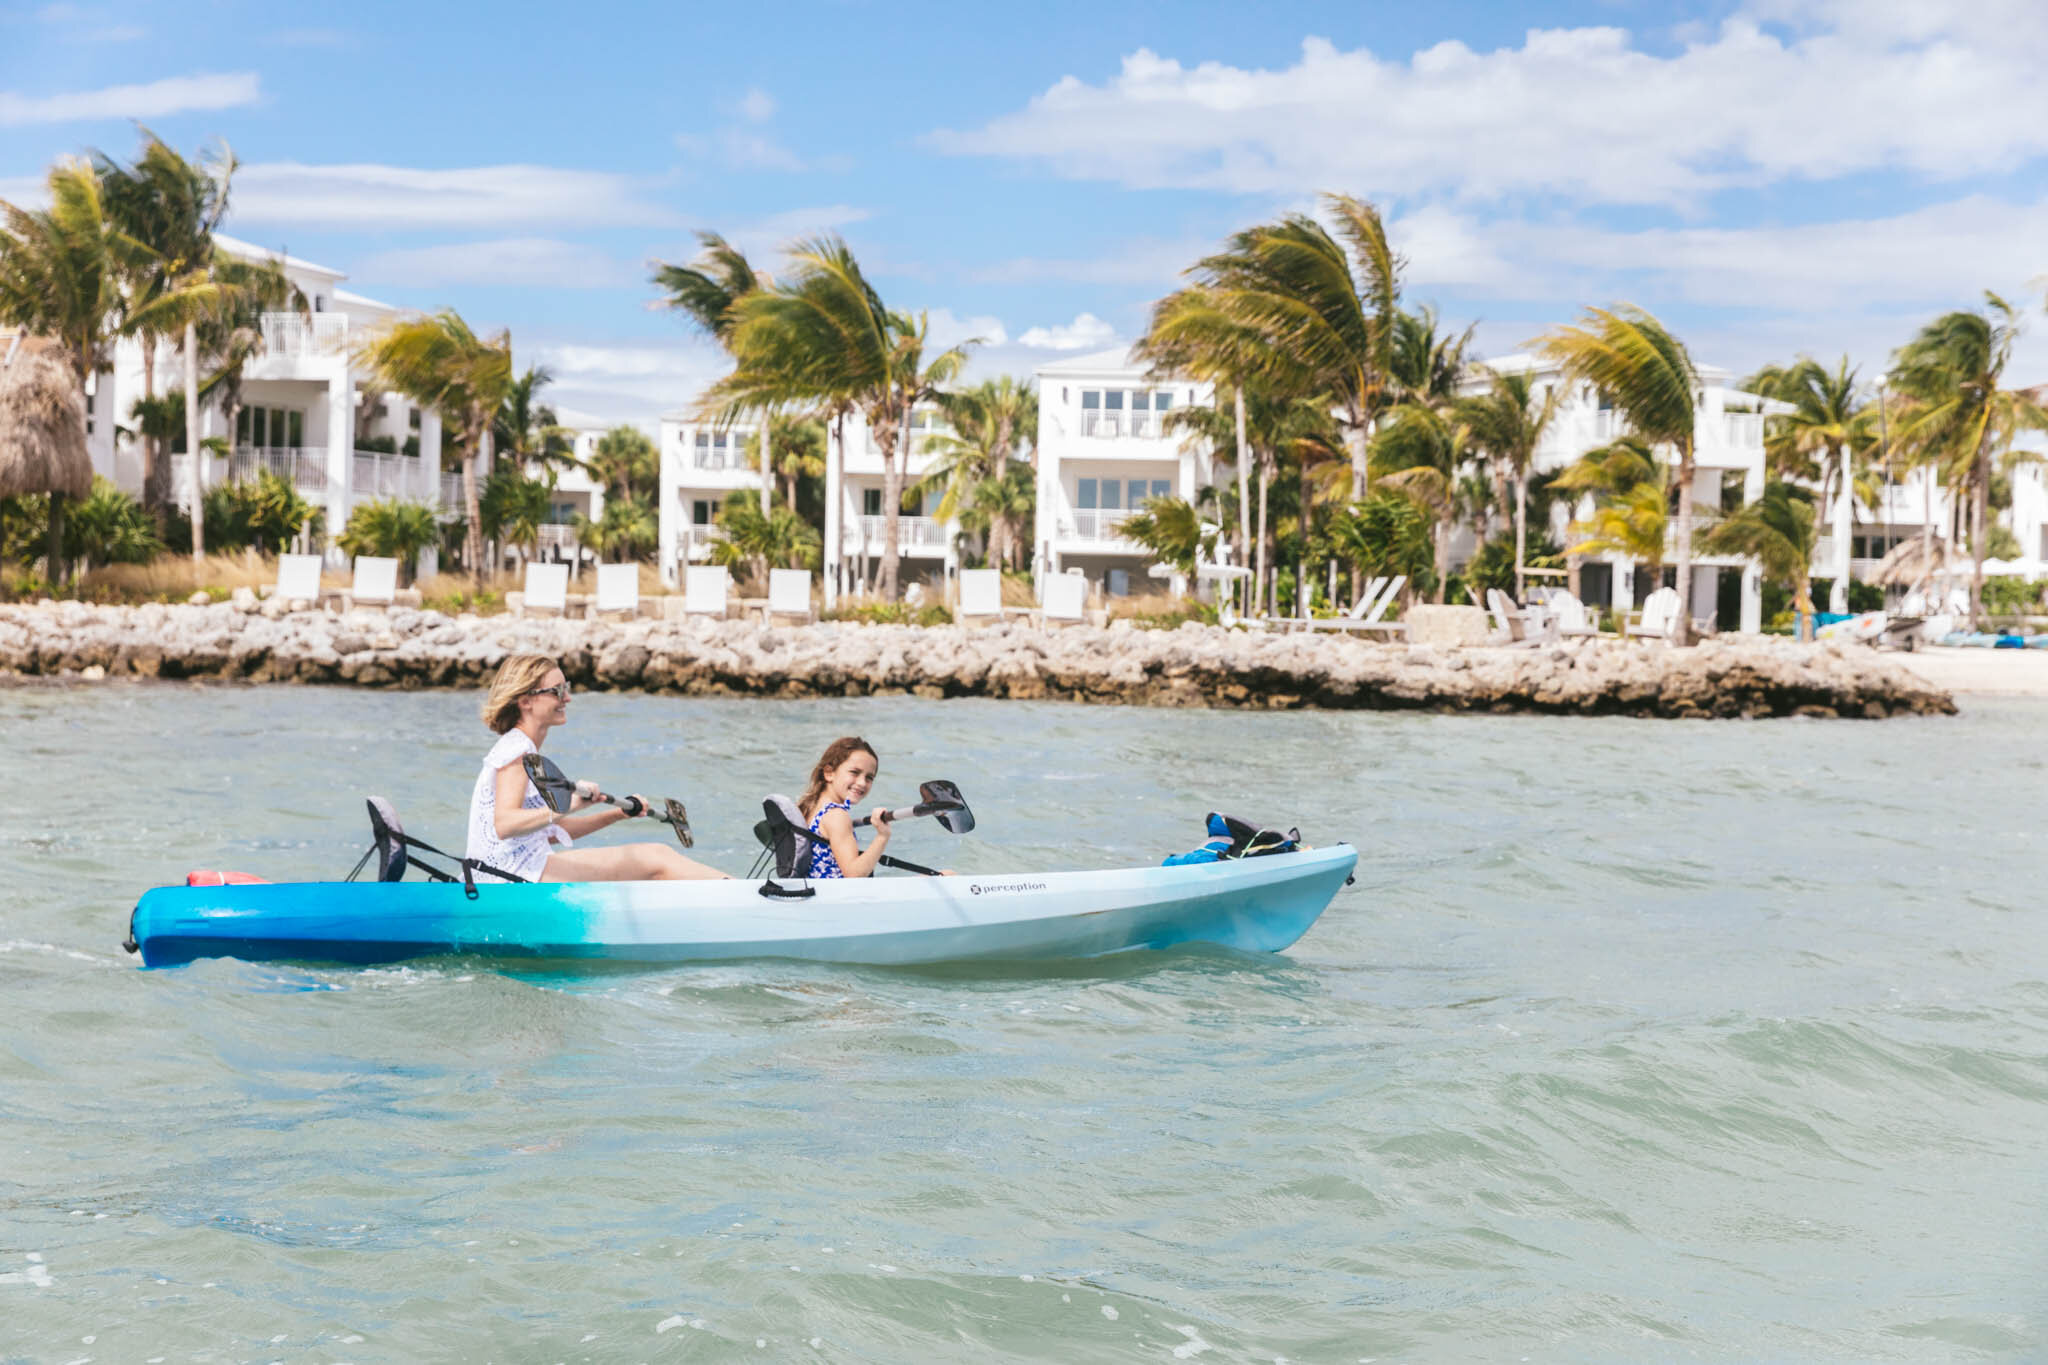  A Mother And Her Young Daughter Paddle In A Kayak In The Ocean Offshore The Islands Of Islamorada With The Resort’s Ocean View Villas In The Background. 